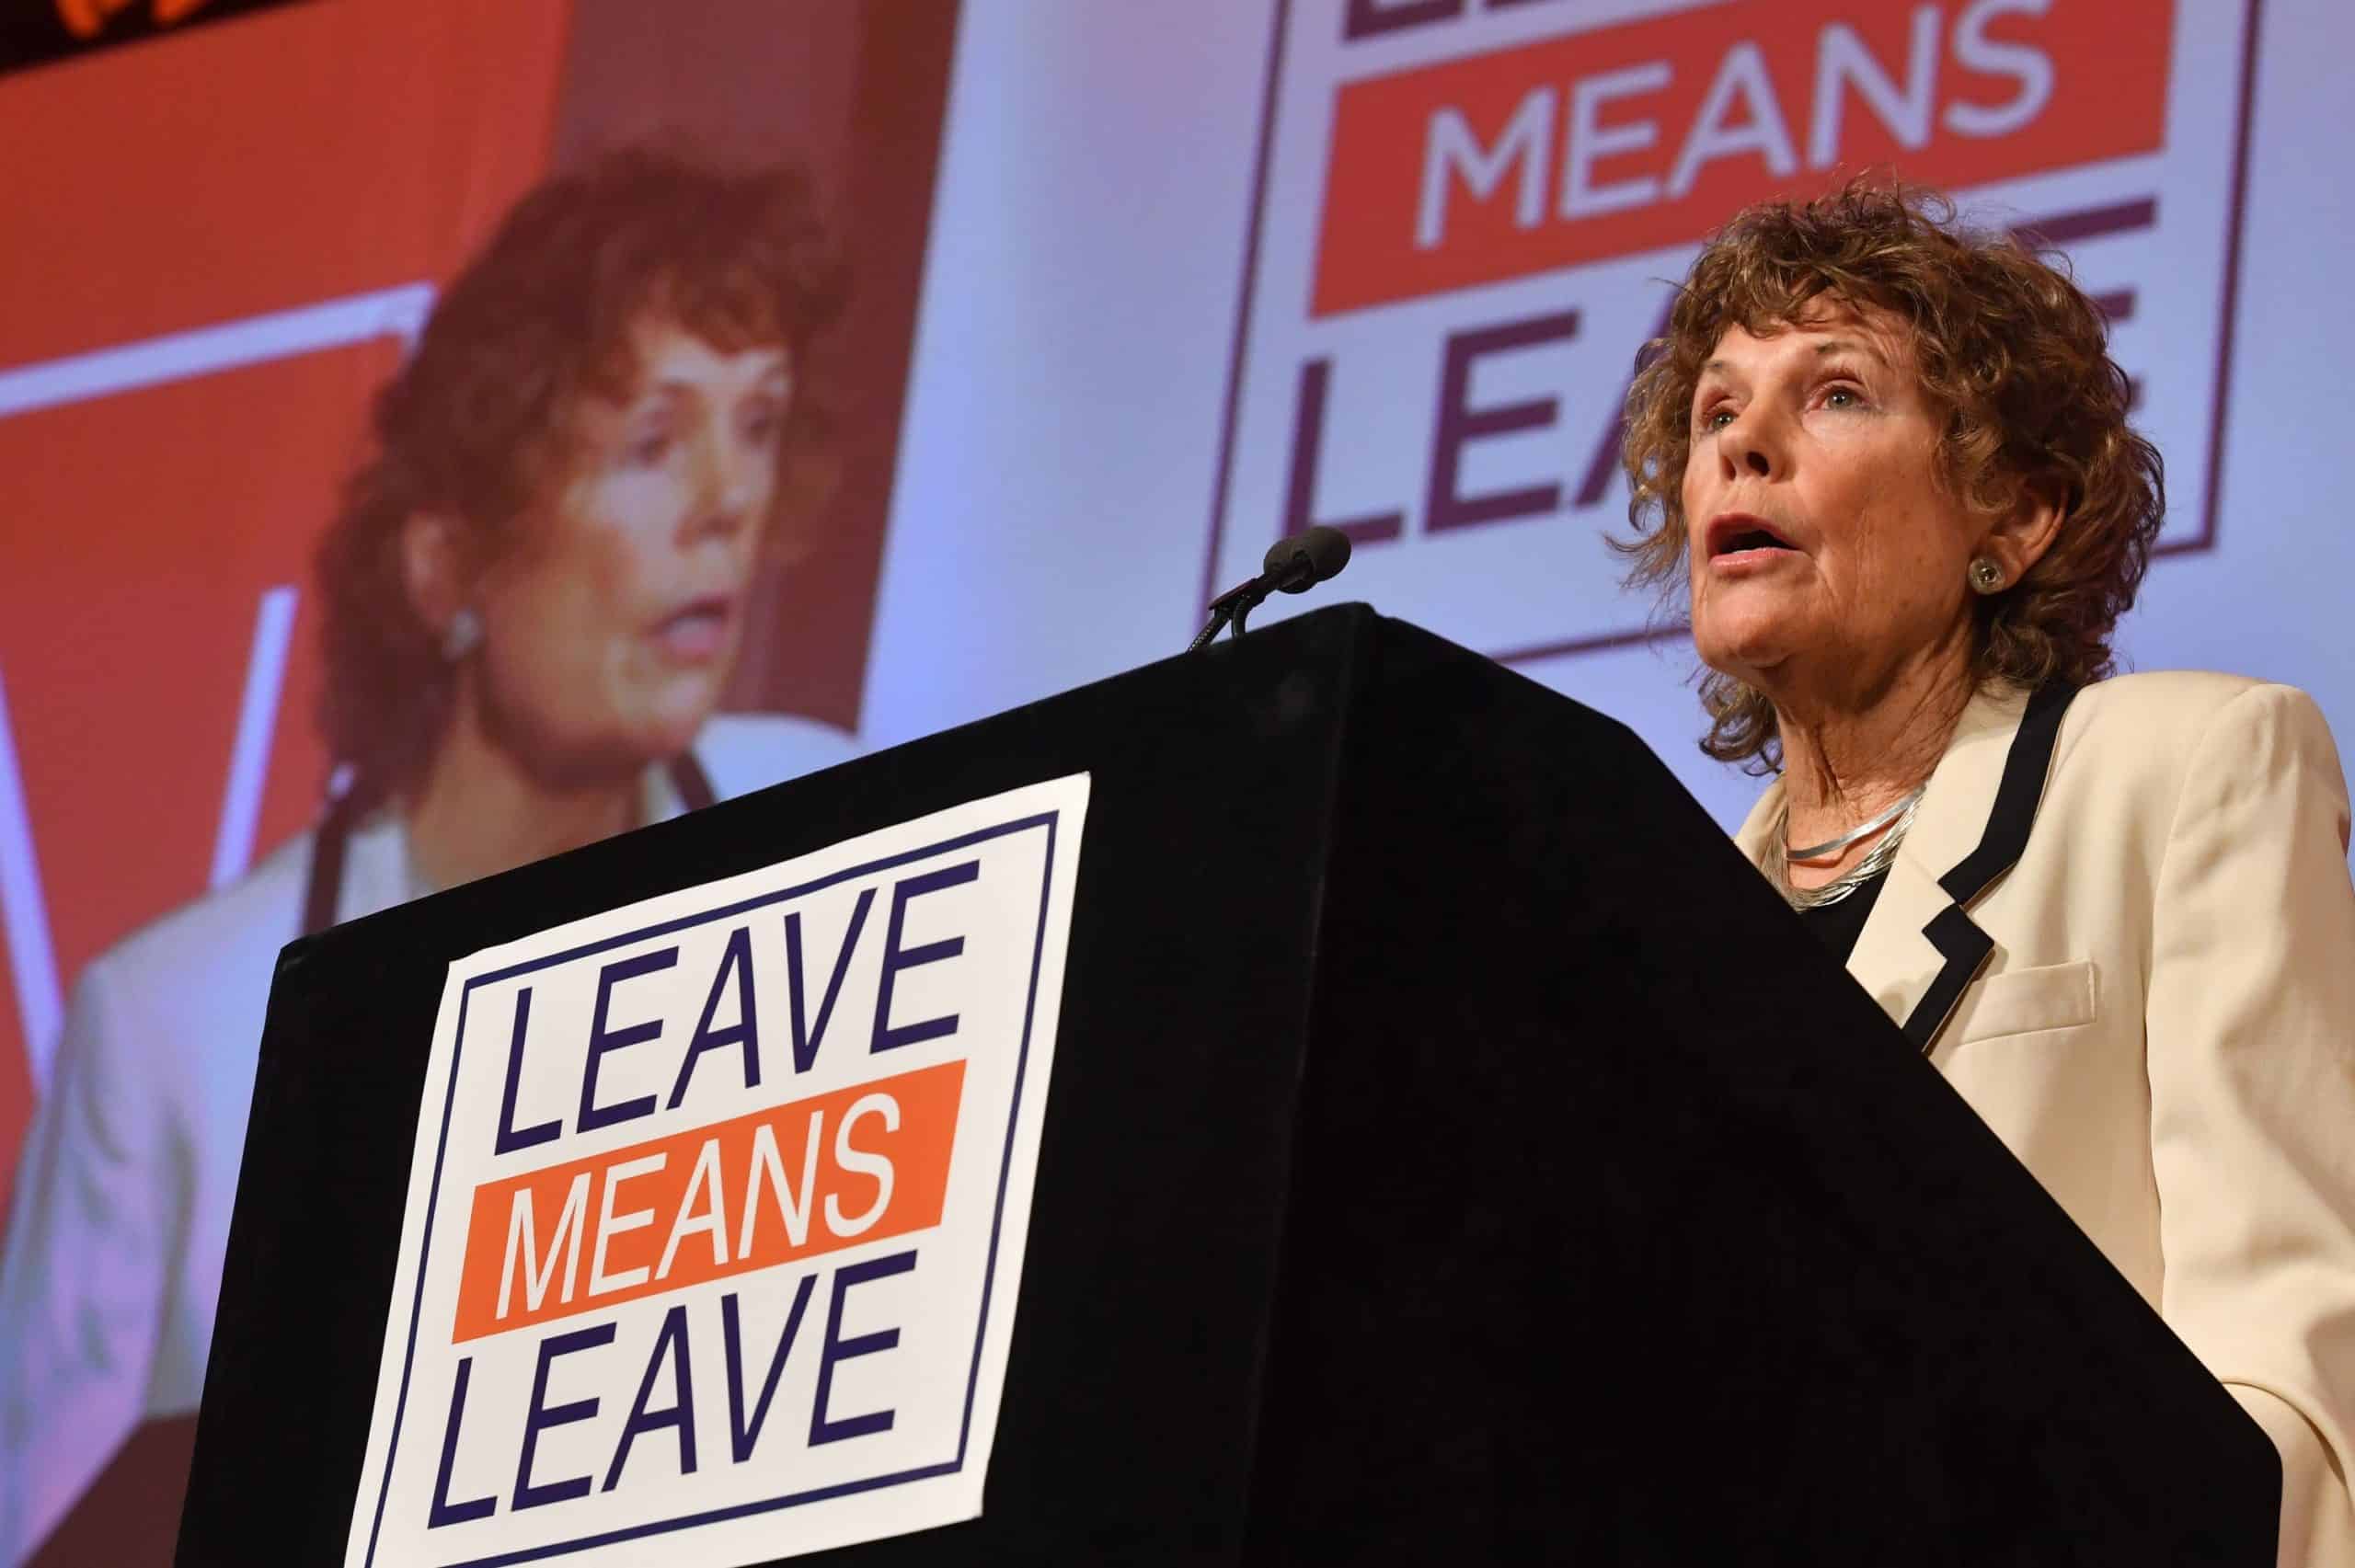 Kate Hoey says Irish used ‘threat of IRA bombs’ to get its way in Brexit talks